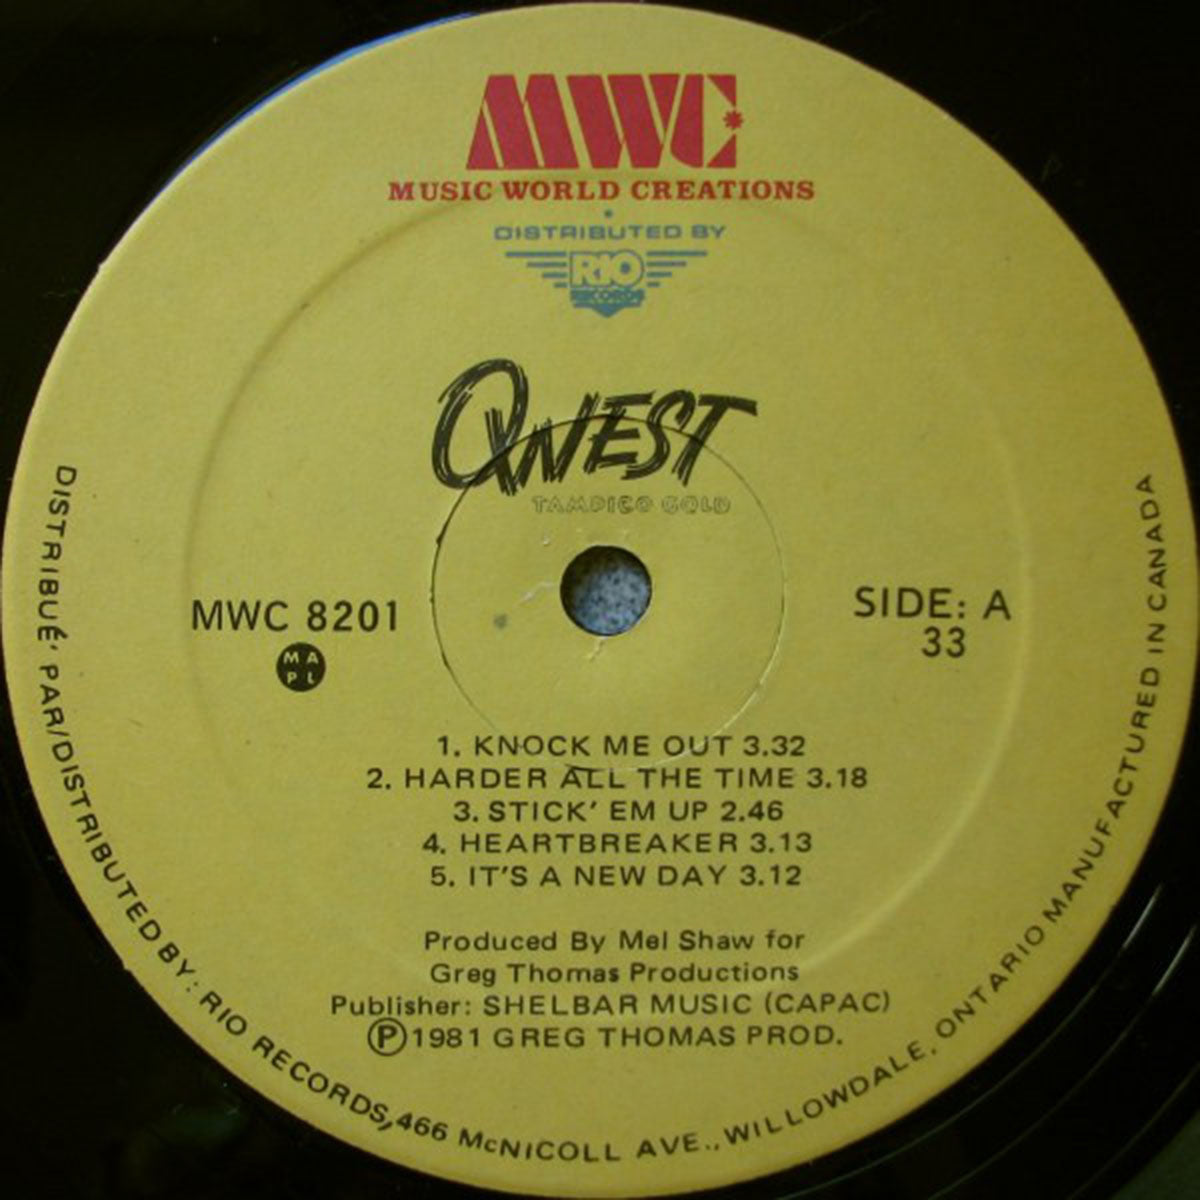 Qwest – Tampico Gold